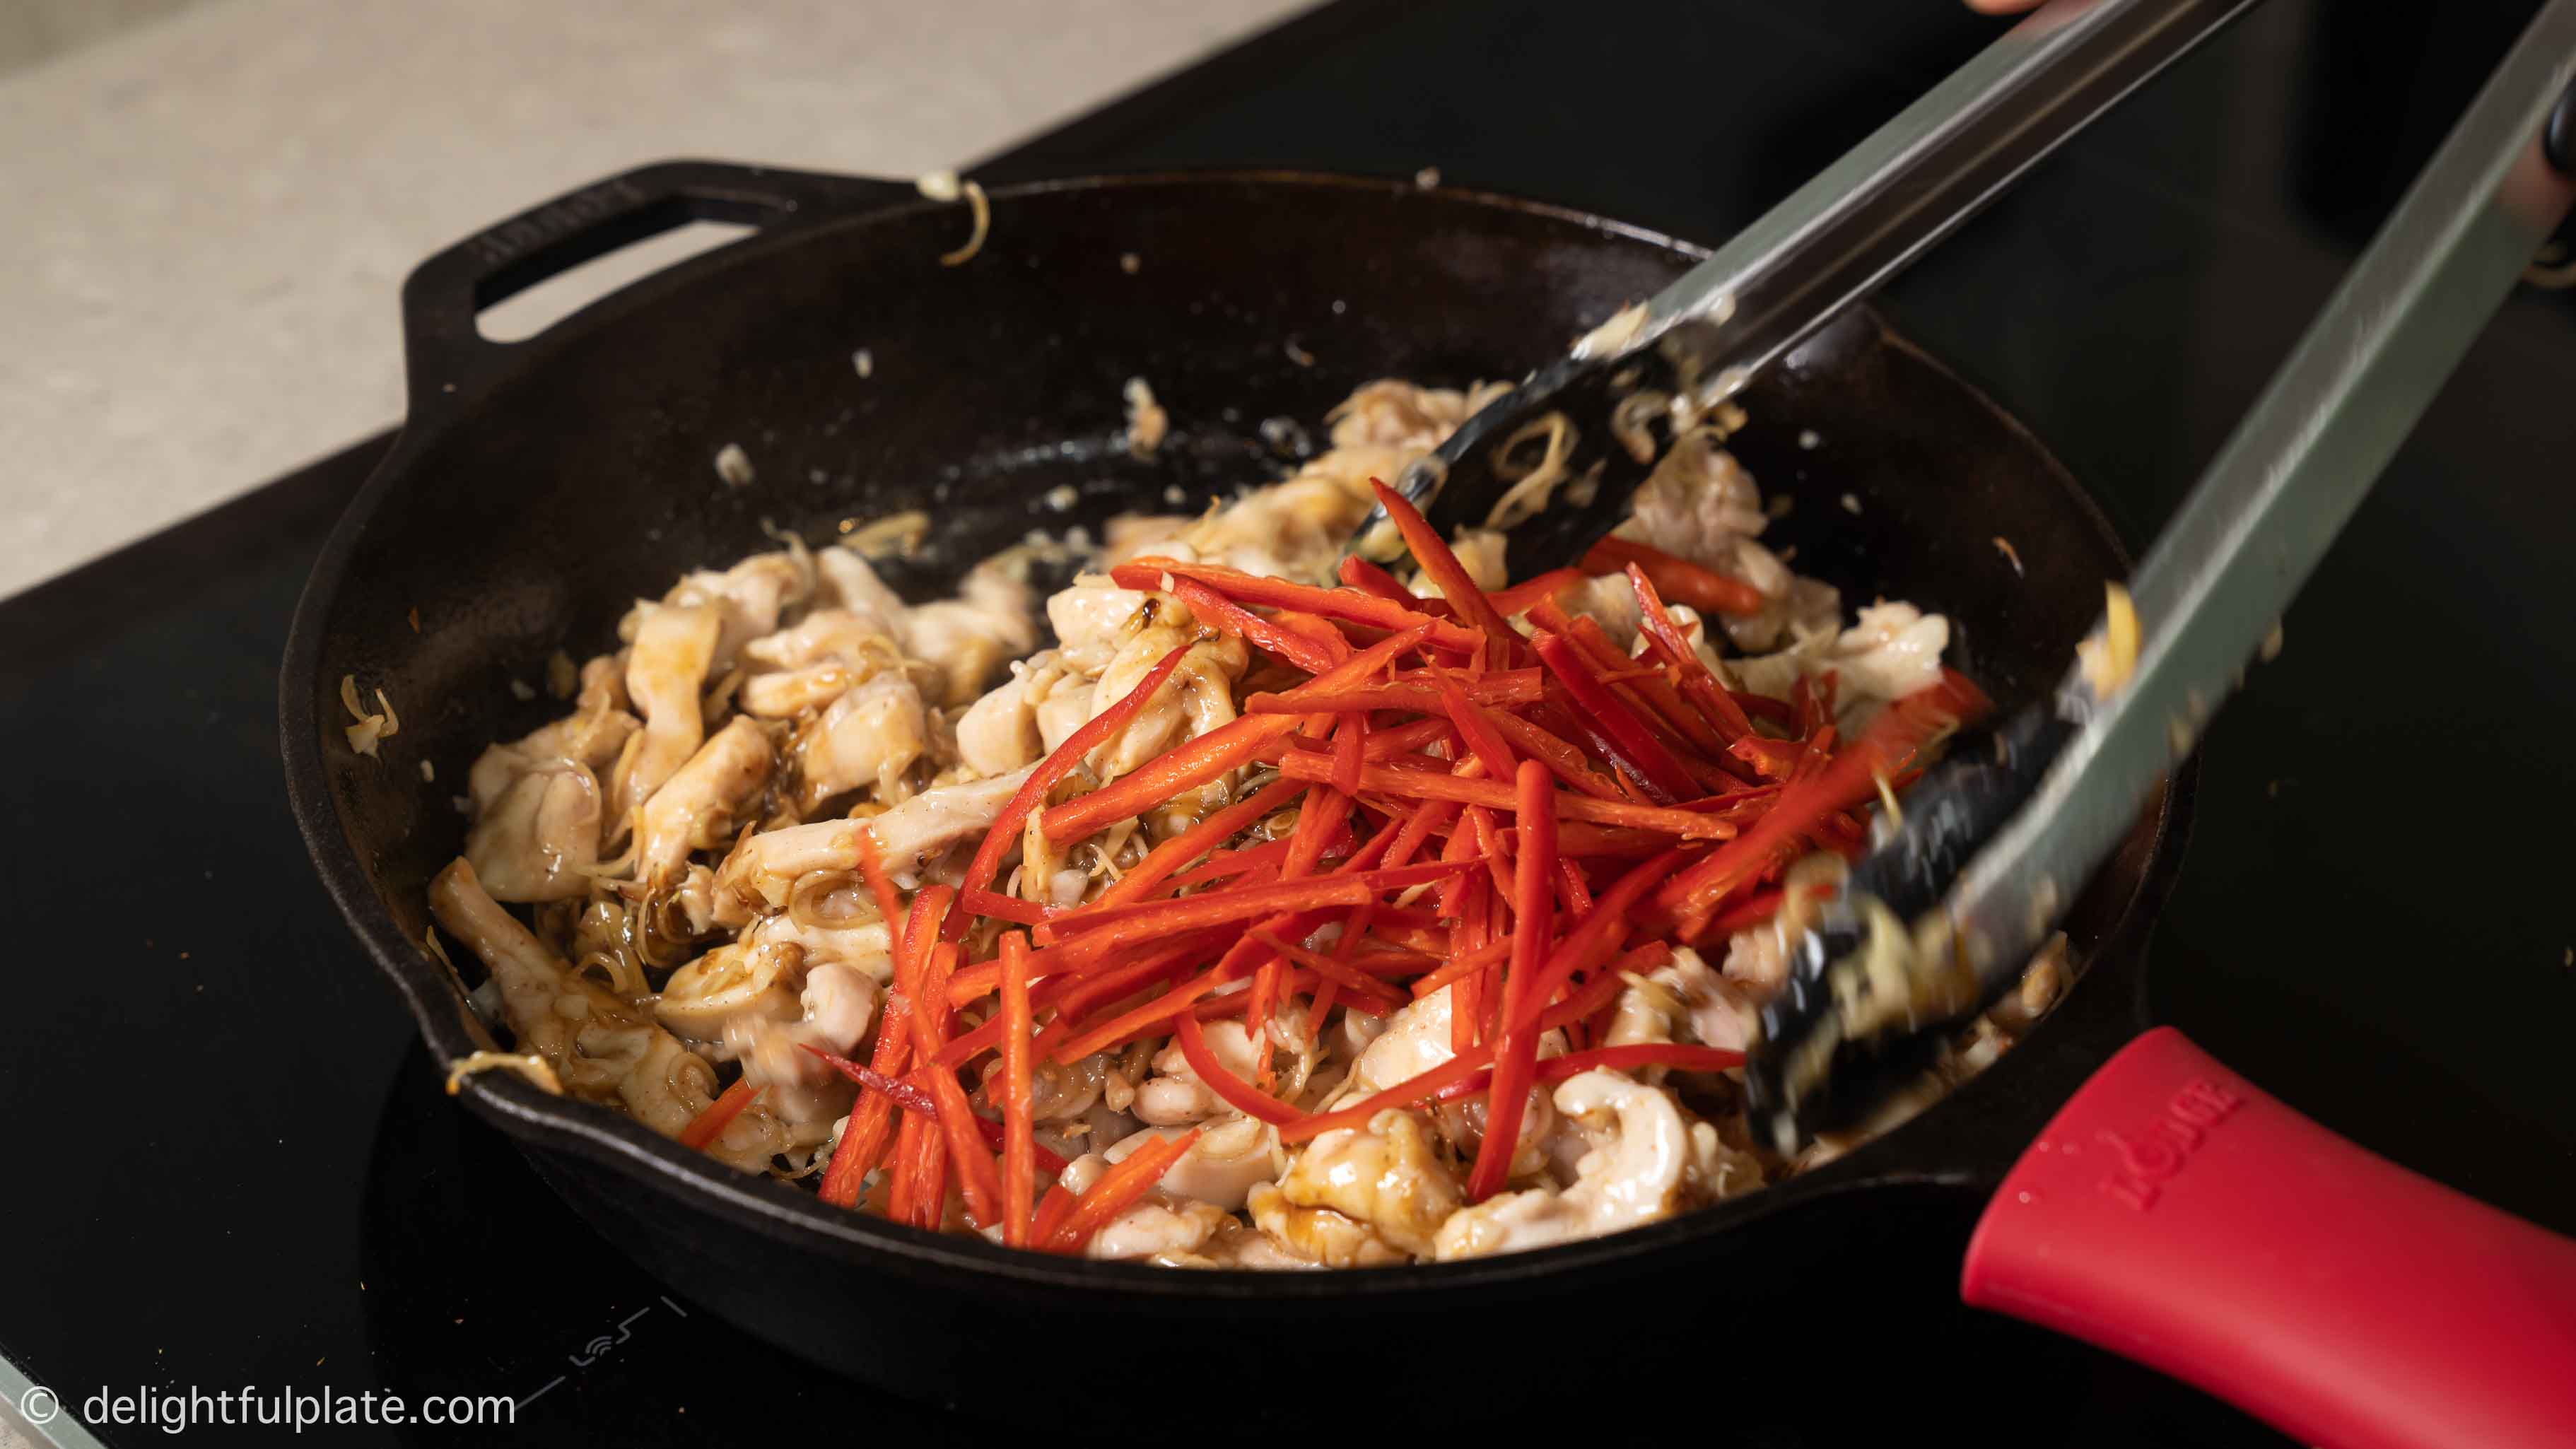 combine the stir-fried chicken with chili peppers